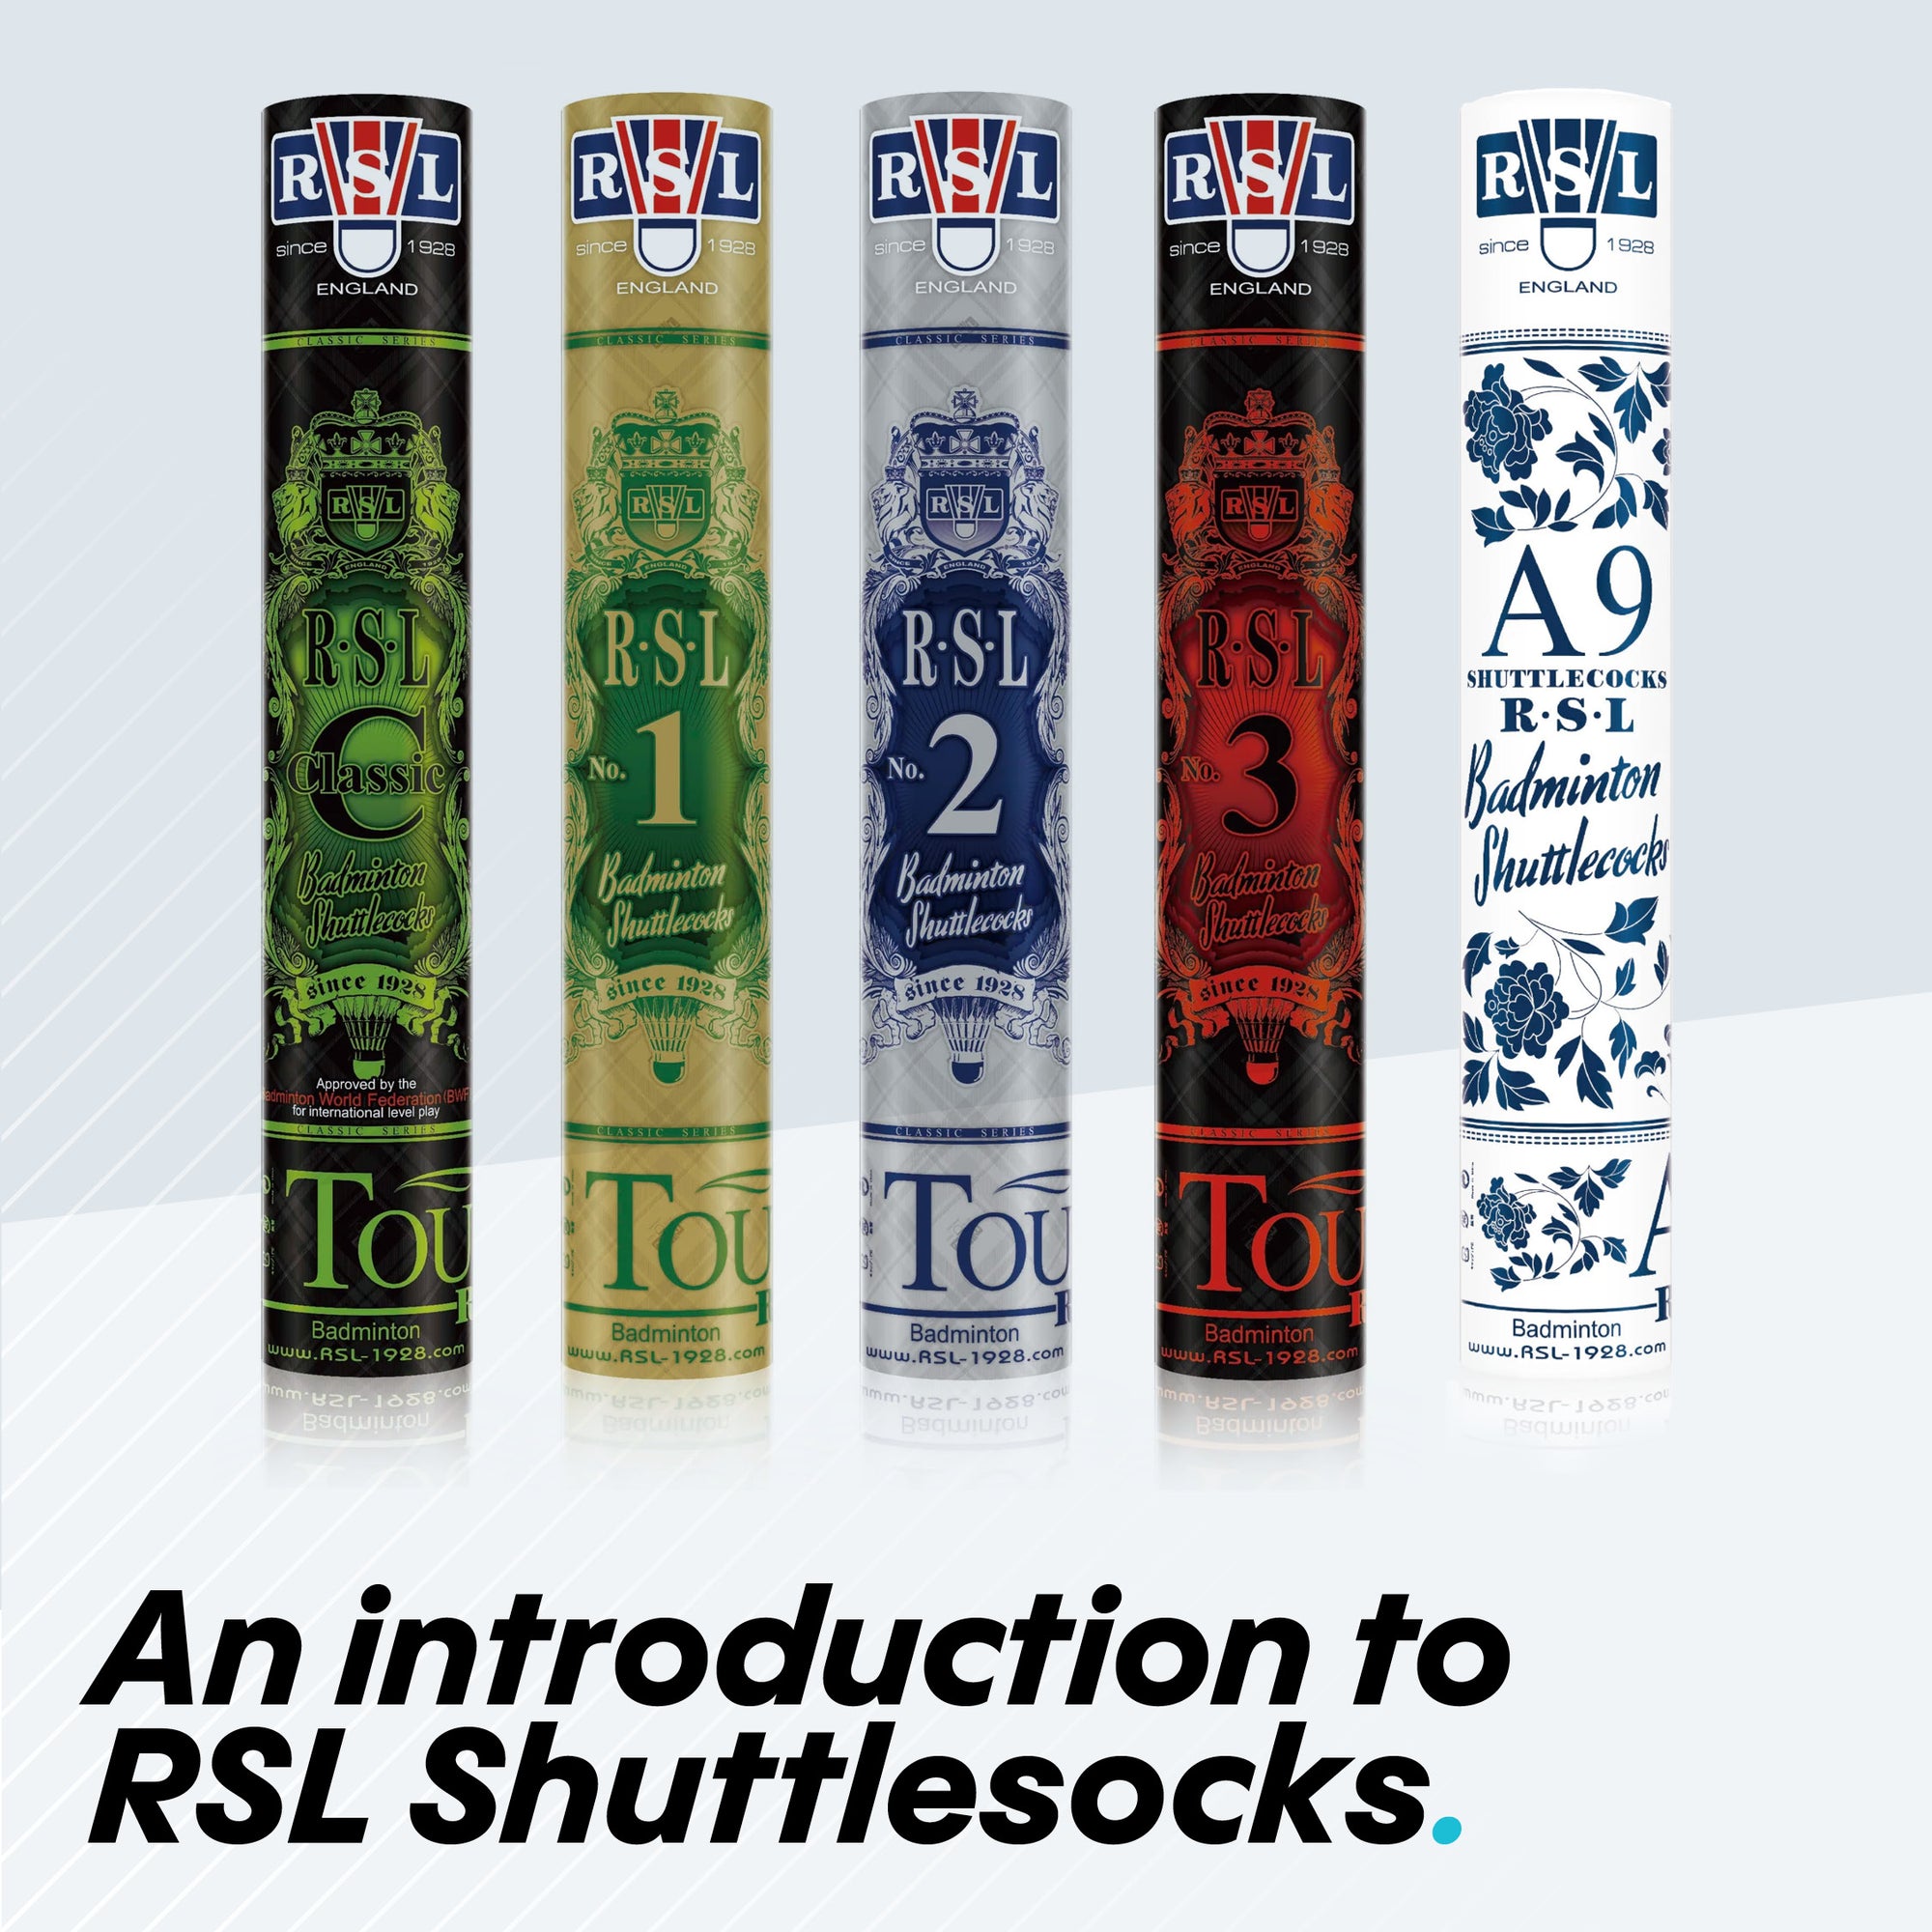 RSL is Back in the UK -  An Introduction to RSL Shuttlecocks